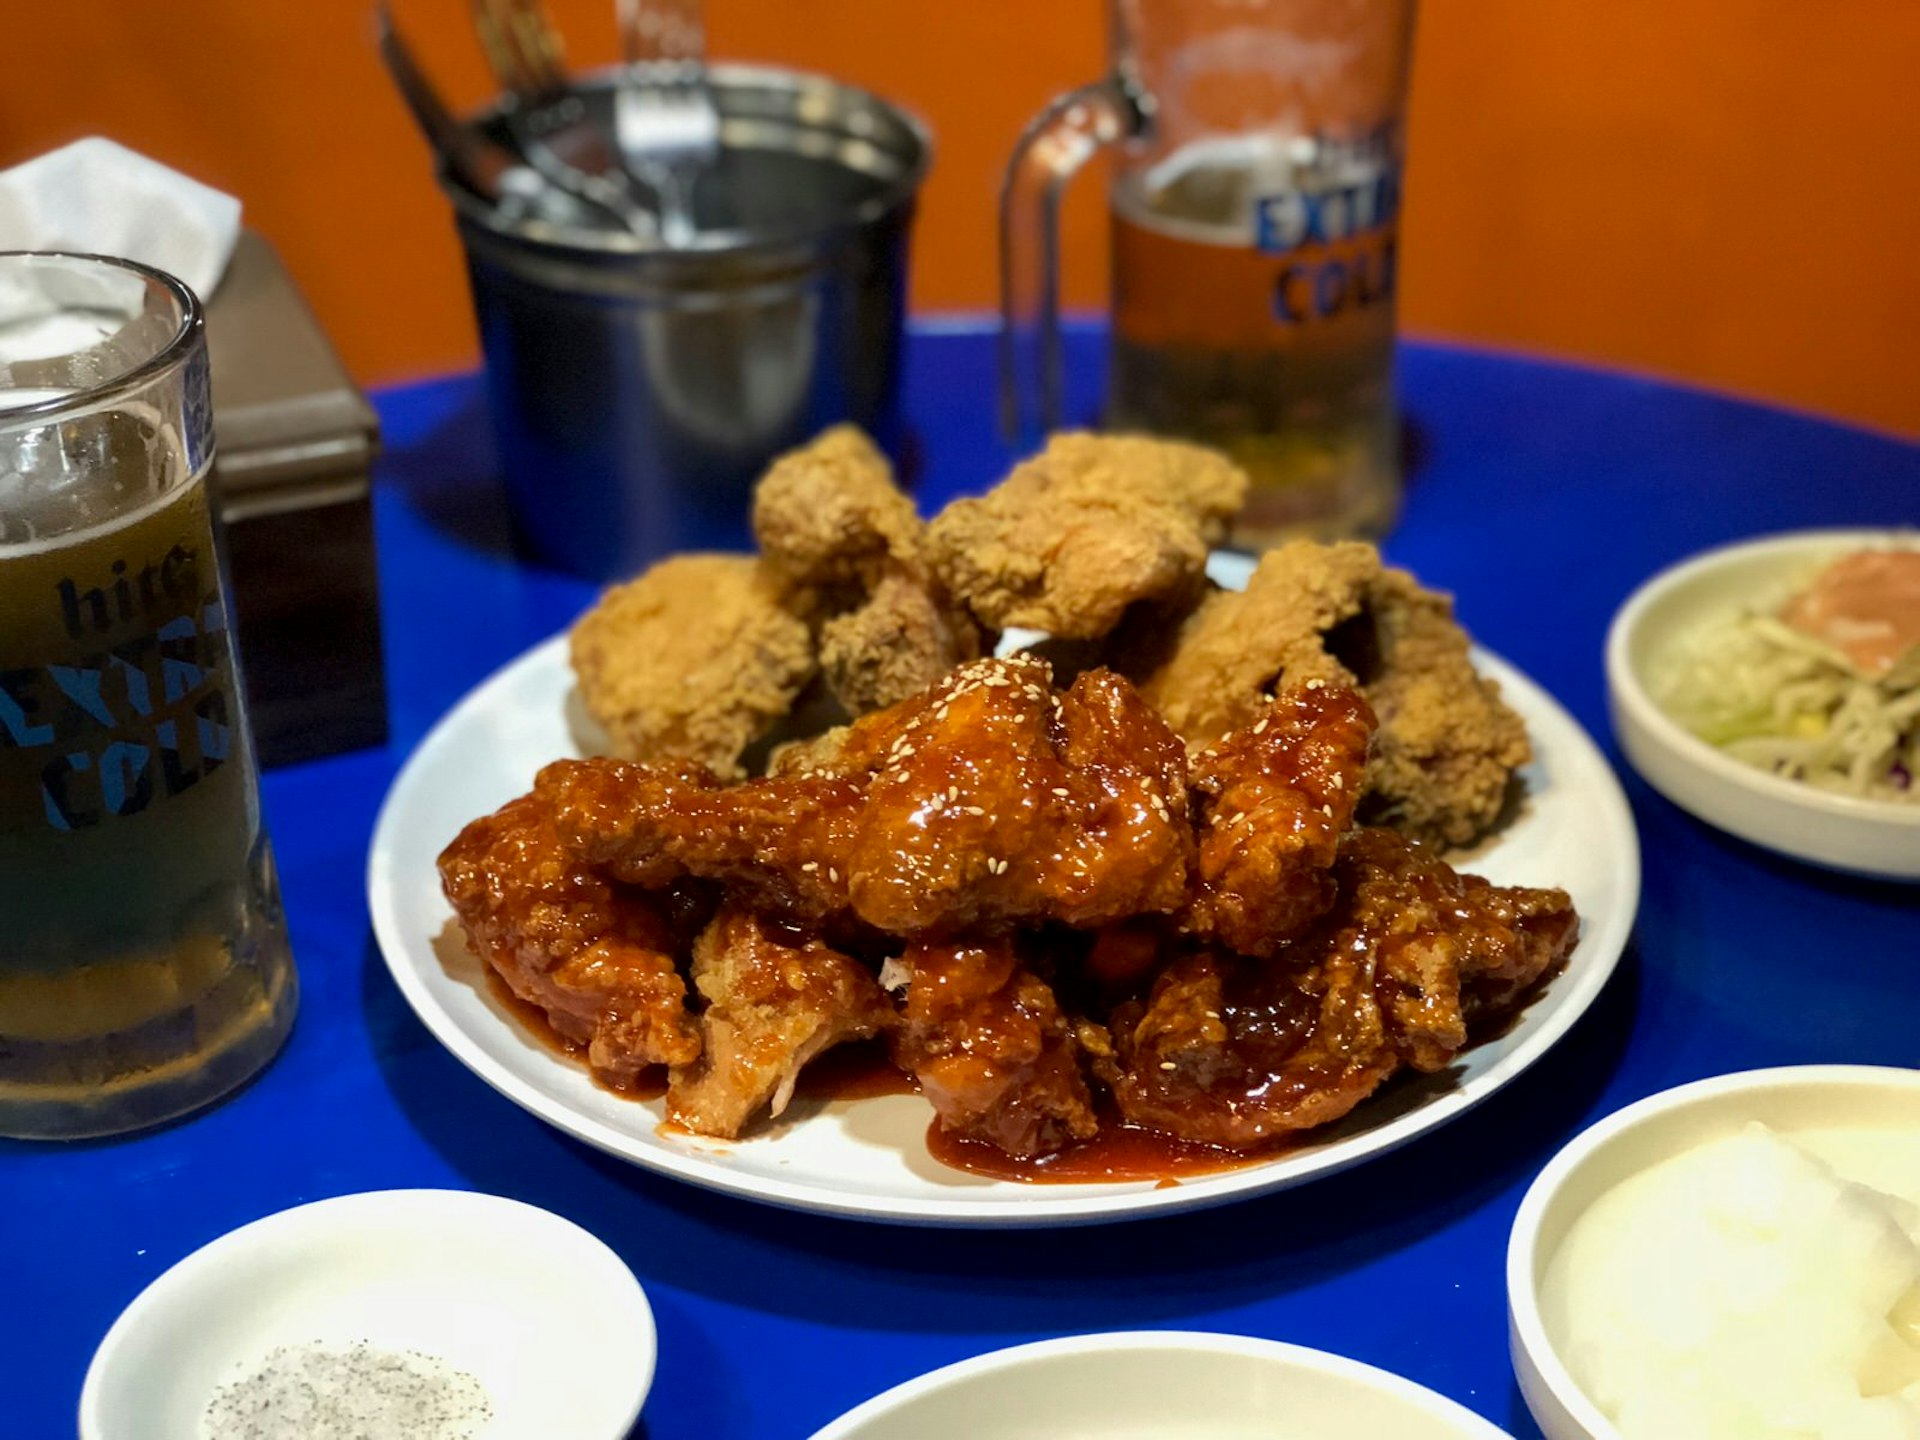 A plate of Korean fried chicken covered with red sauce on a blue table with mugs of beer in the background